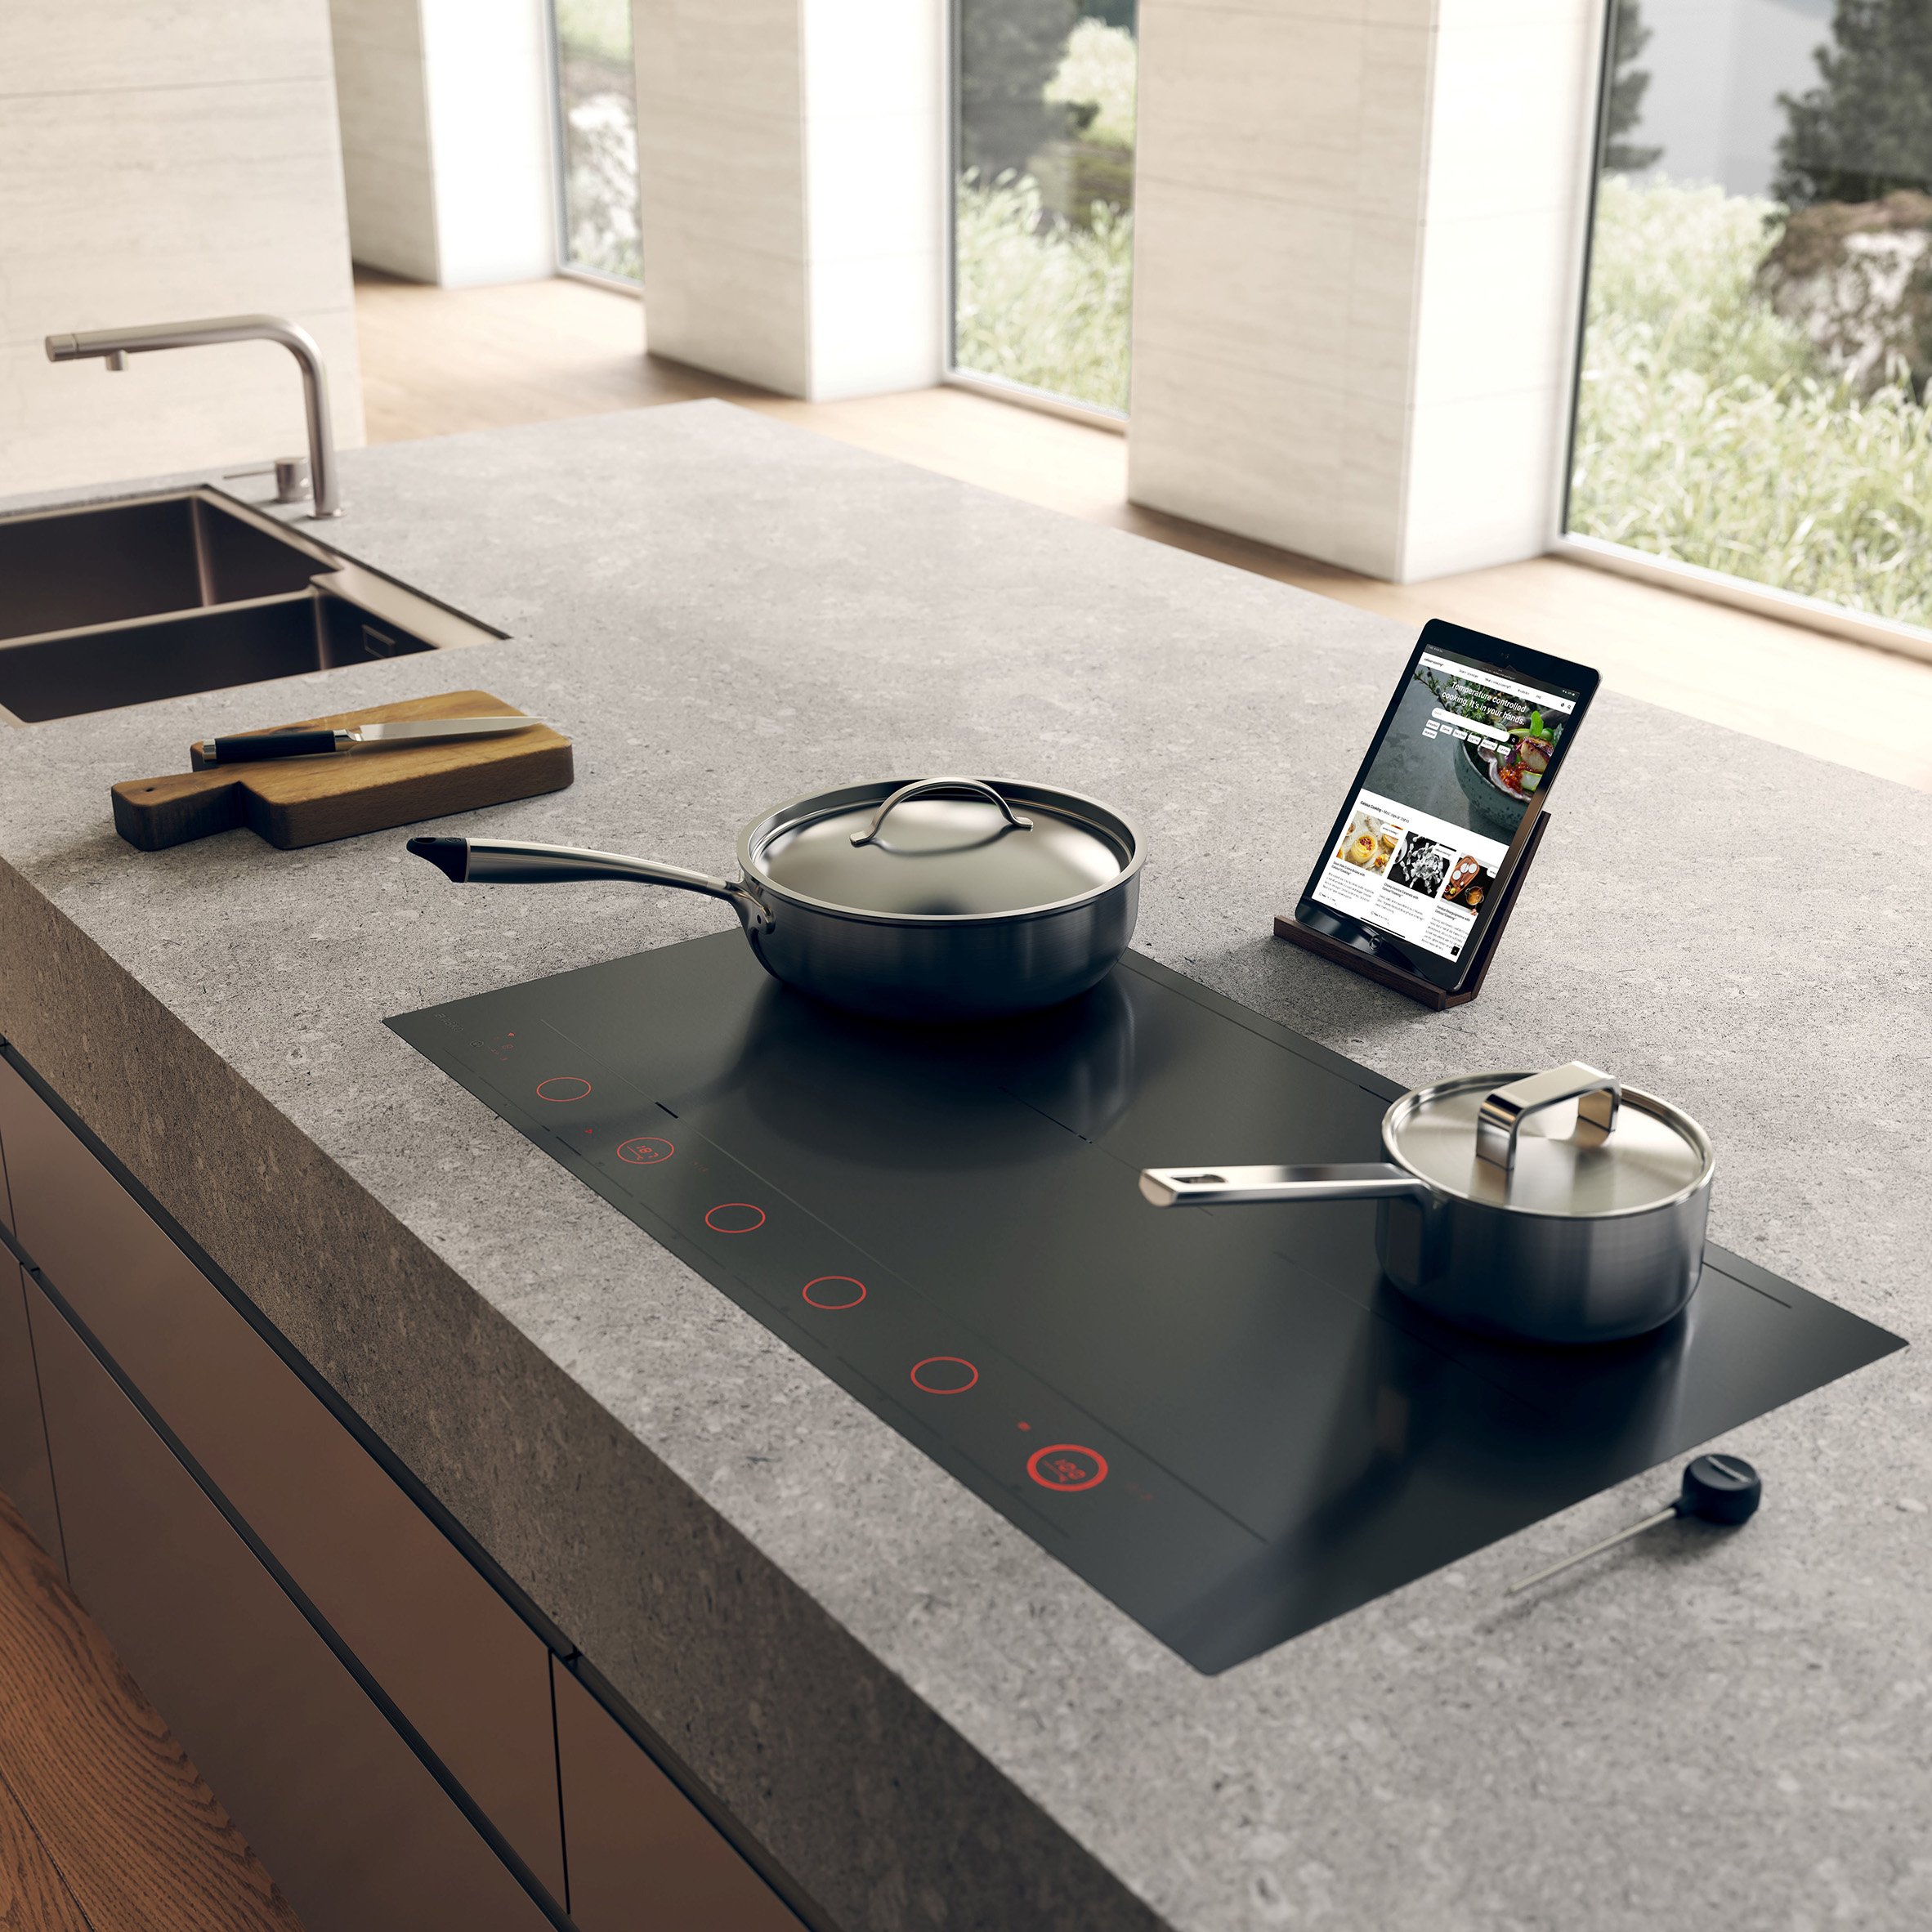 Celsius Cooking system by Asko